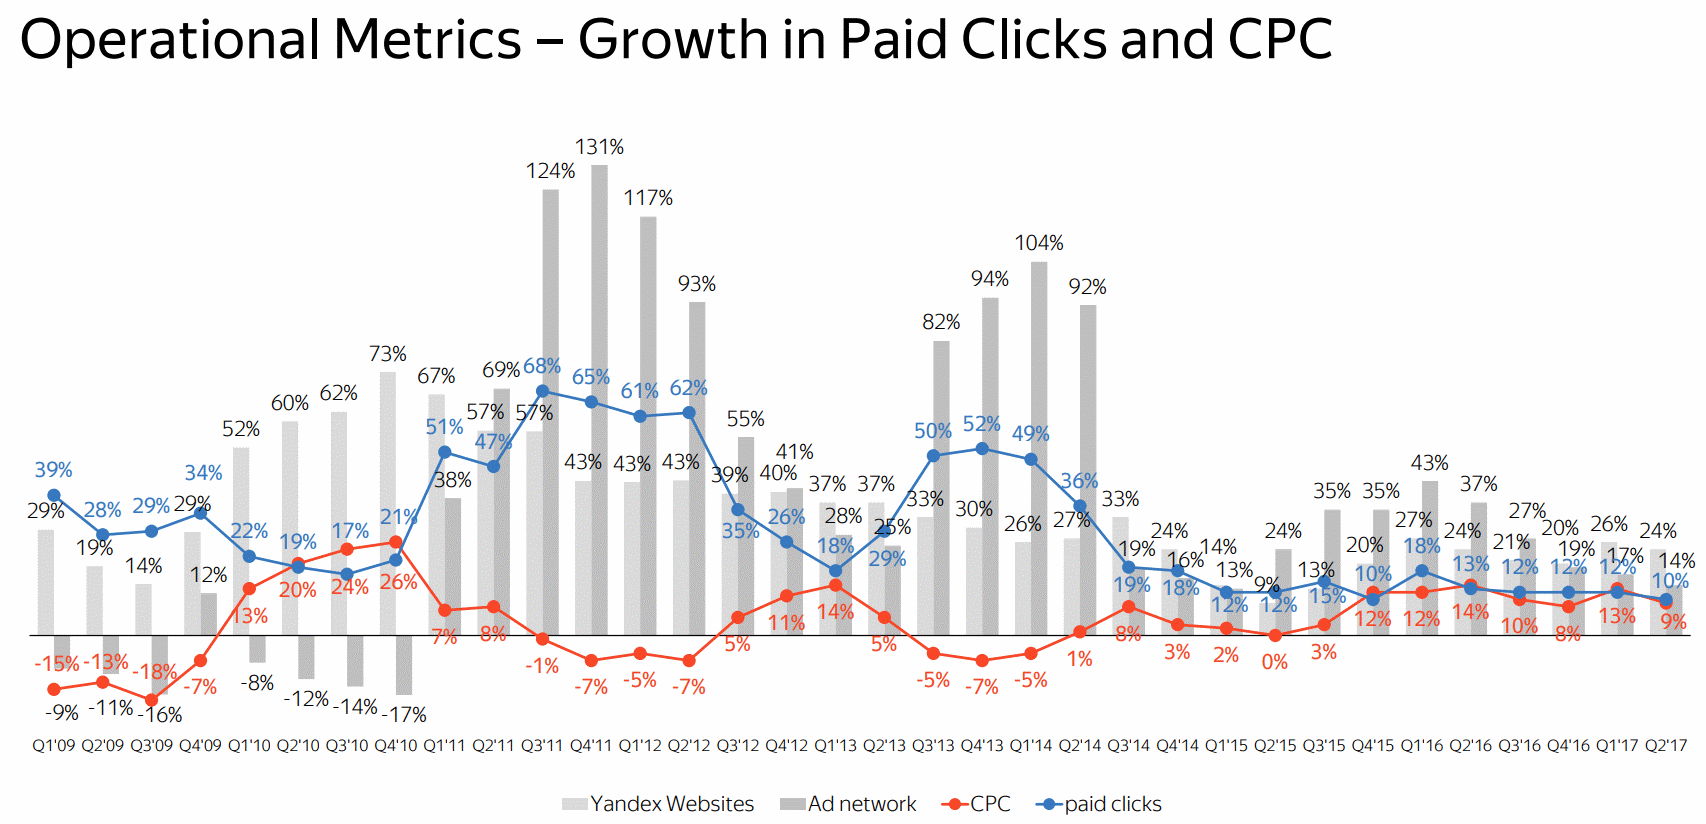 Yandex Growth in Paid Clicks and CPC